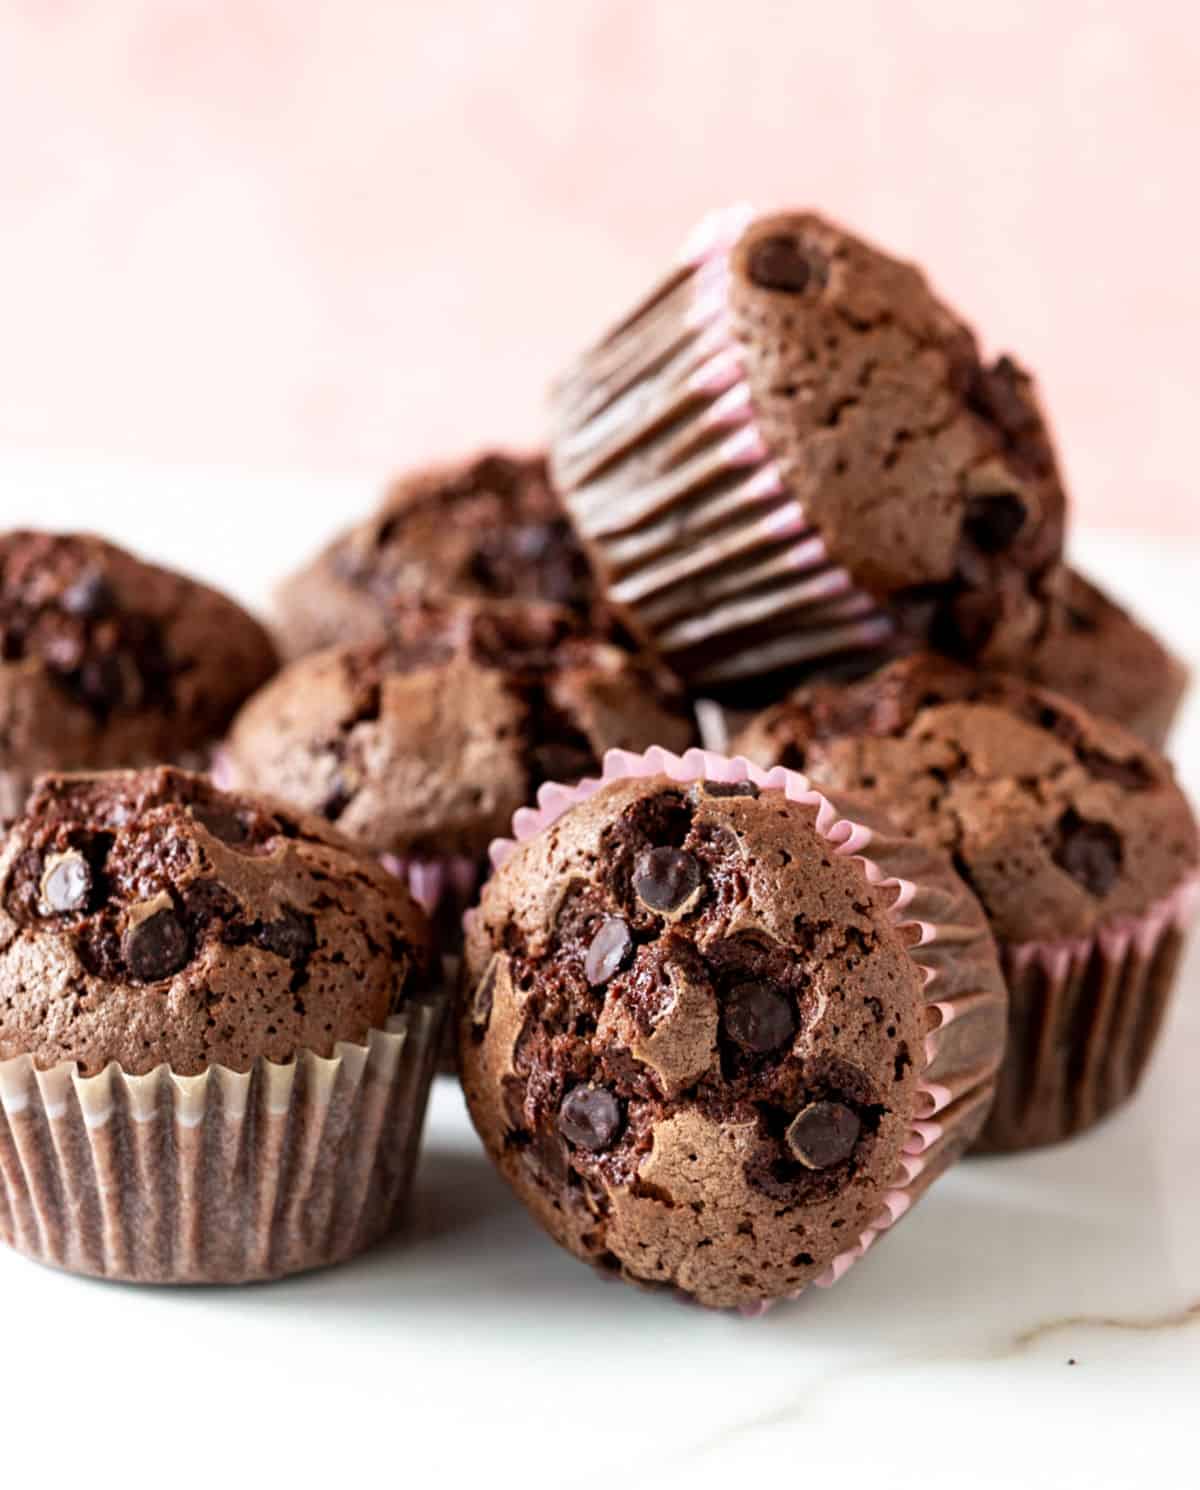 Close up of several chocolate muffins in a mound. White marble surface and pink background.